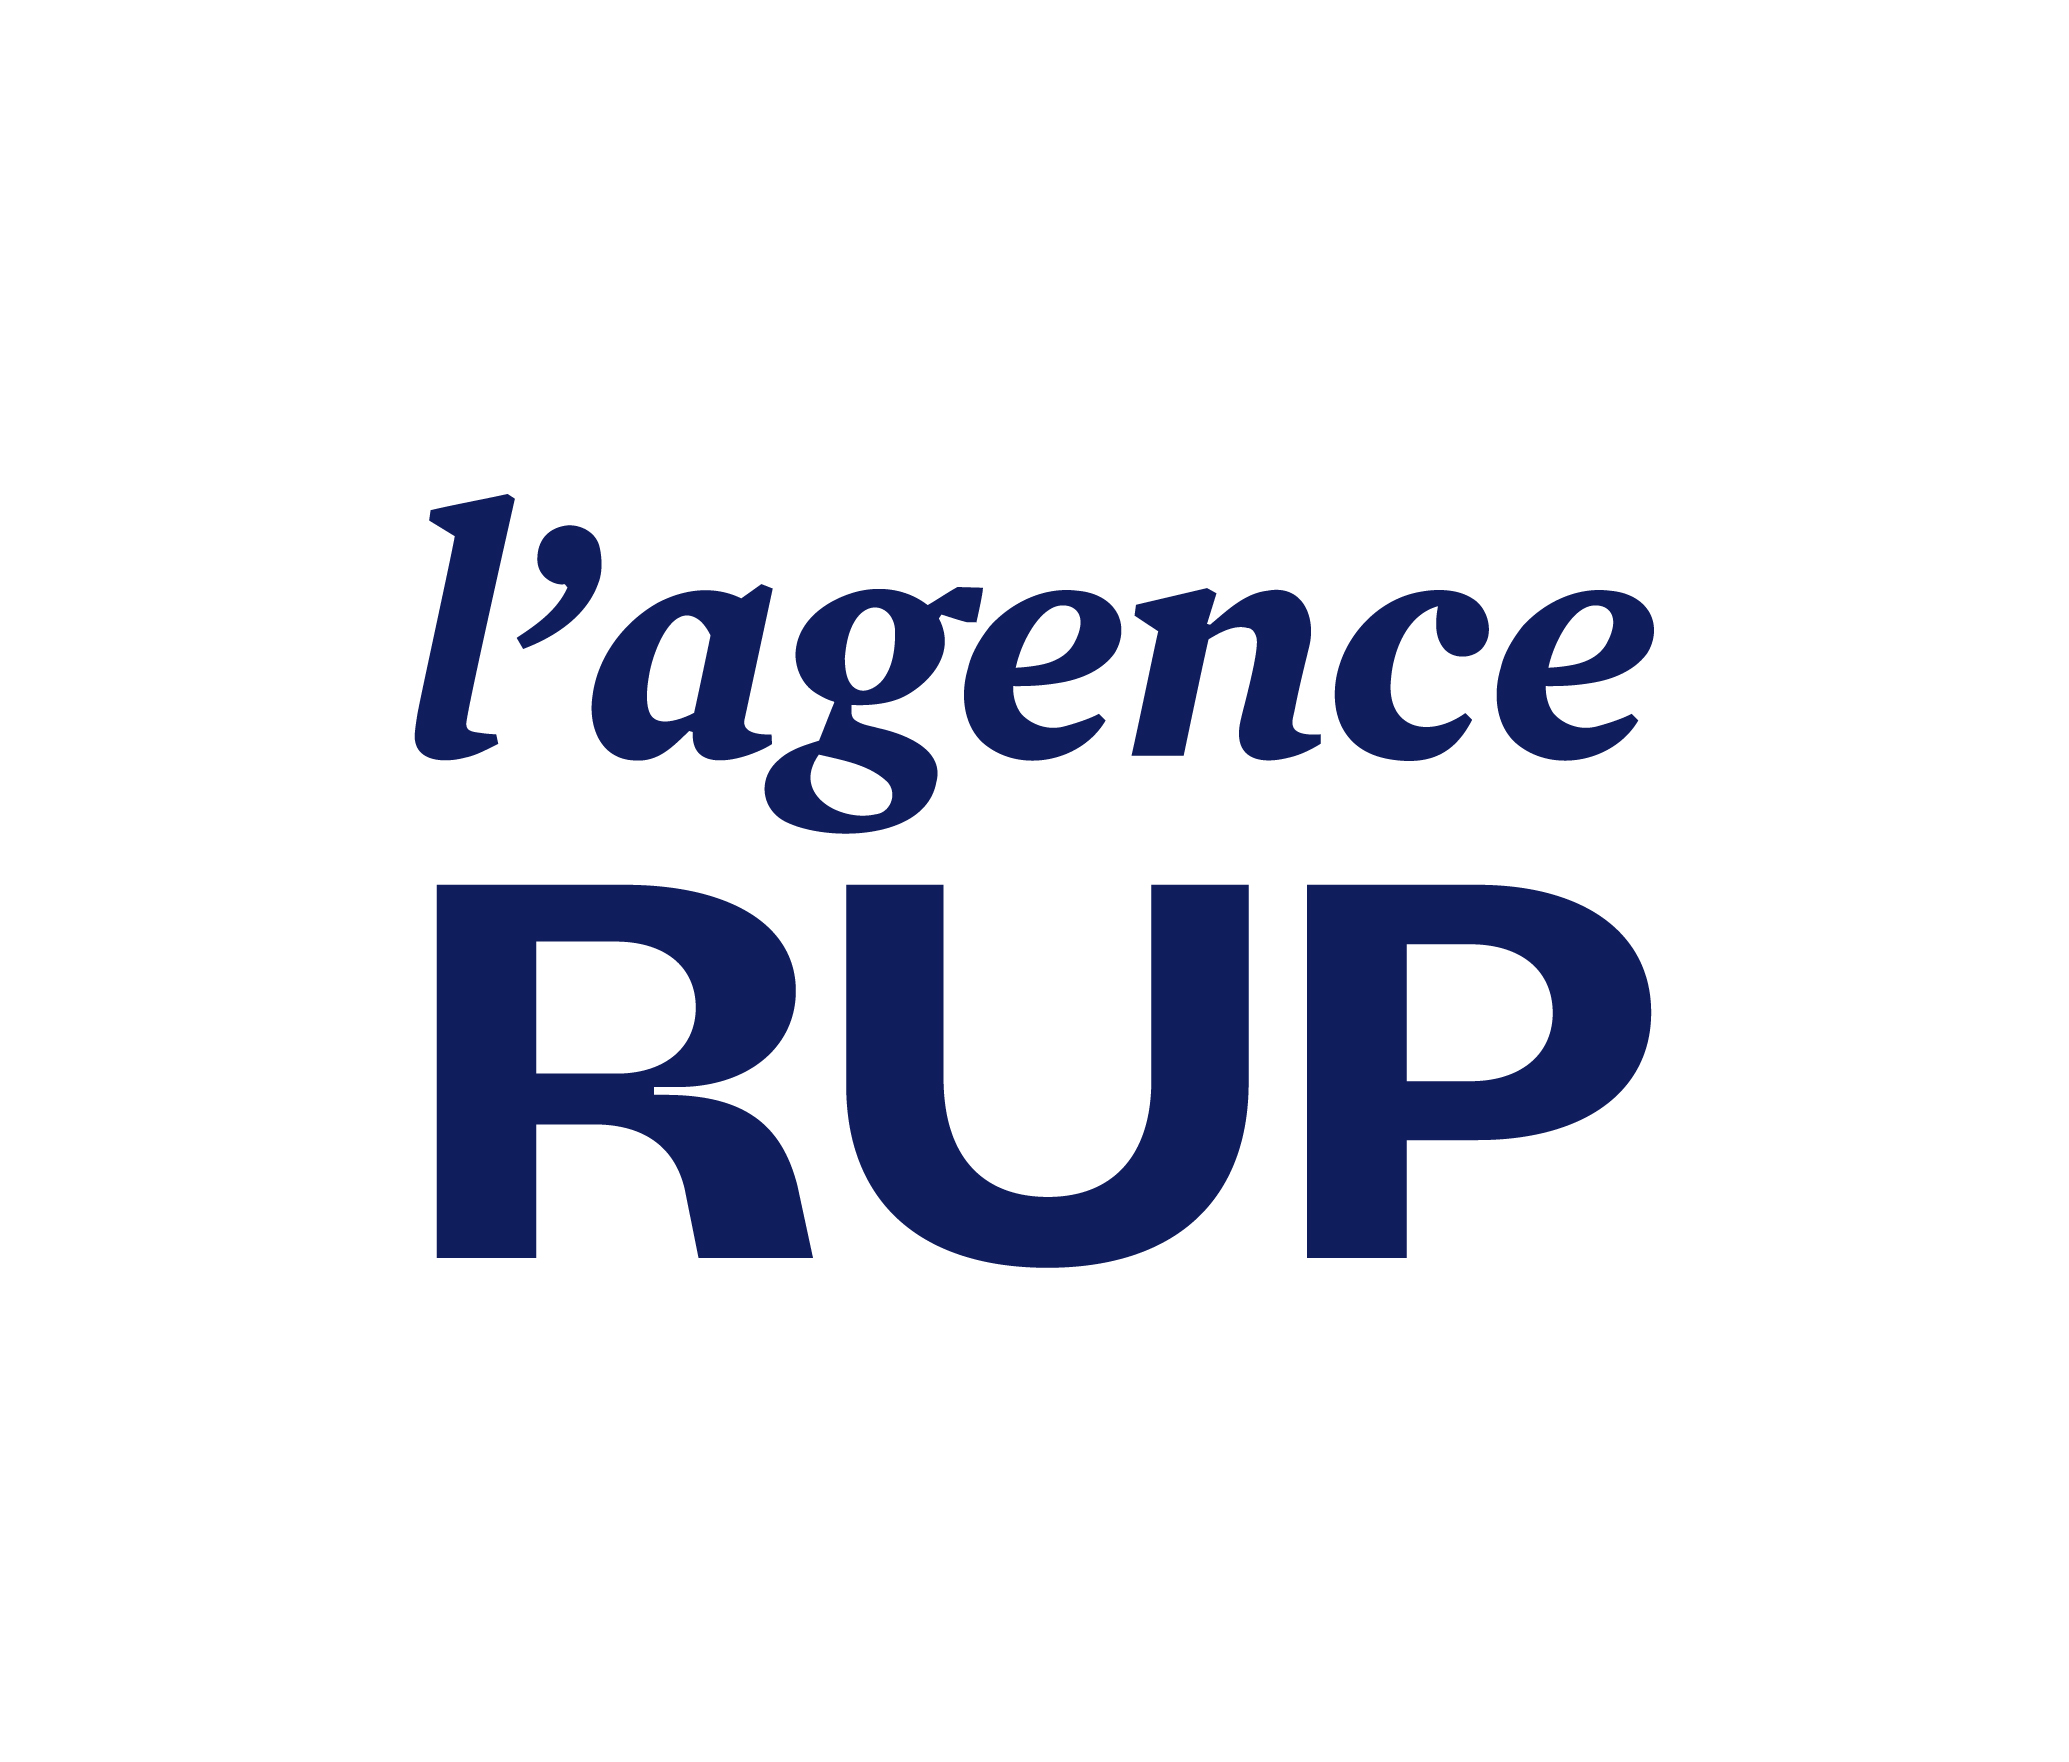 L'agence RUP